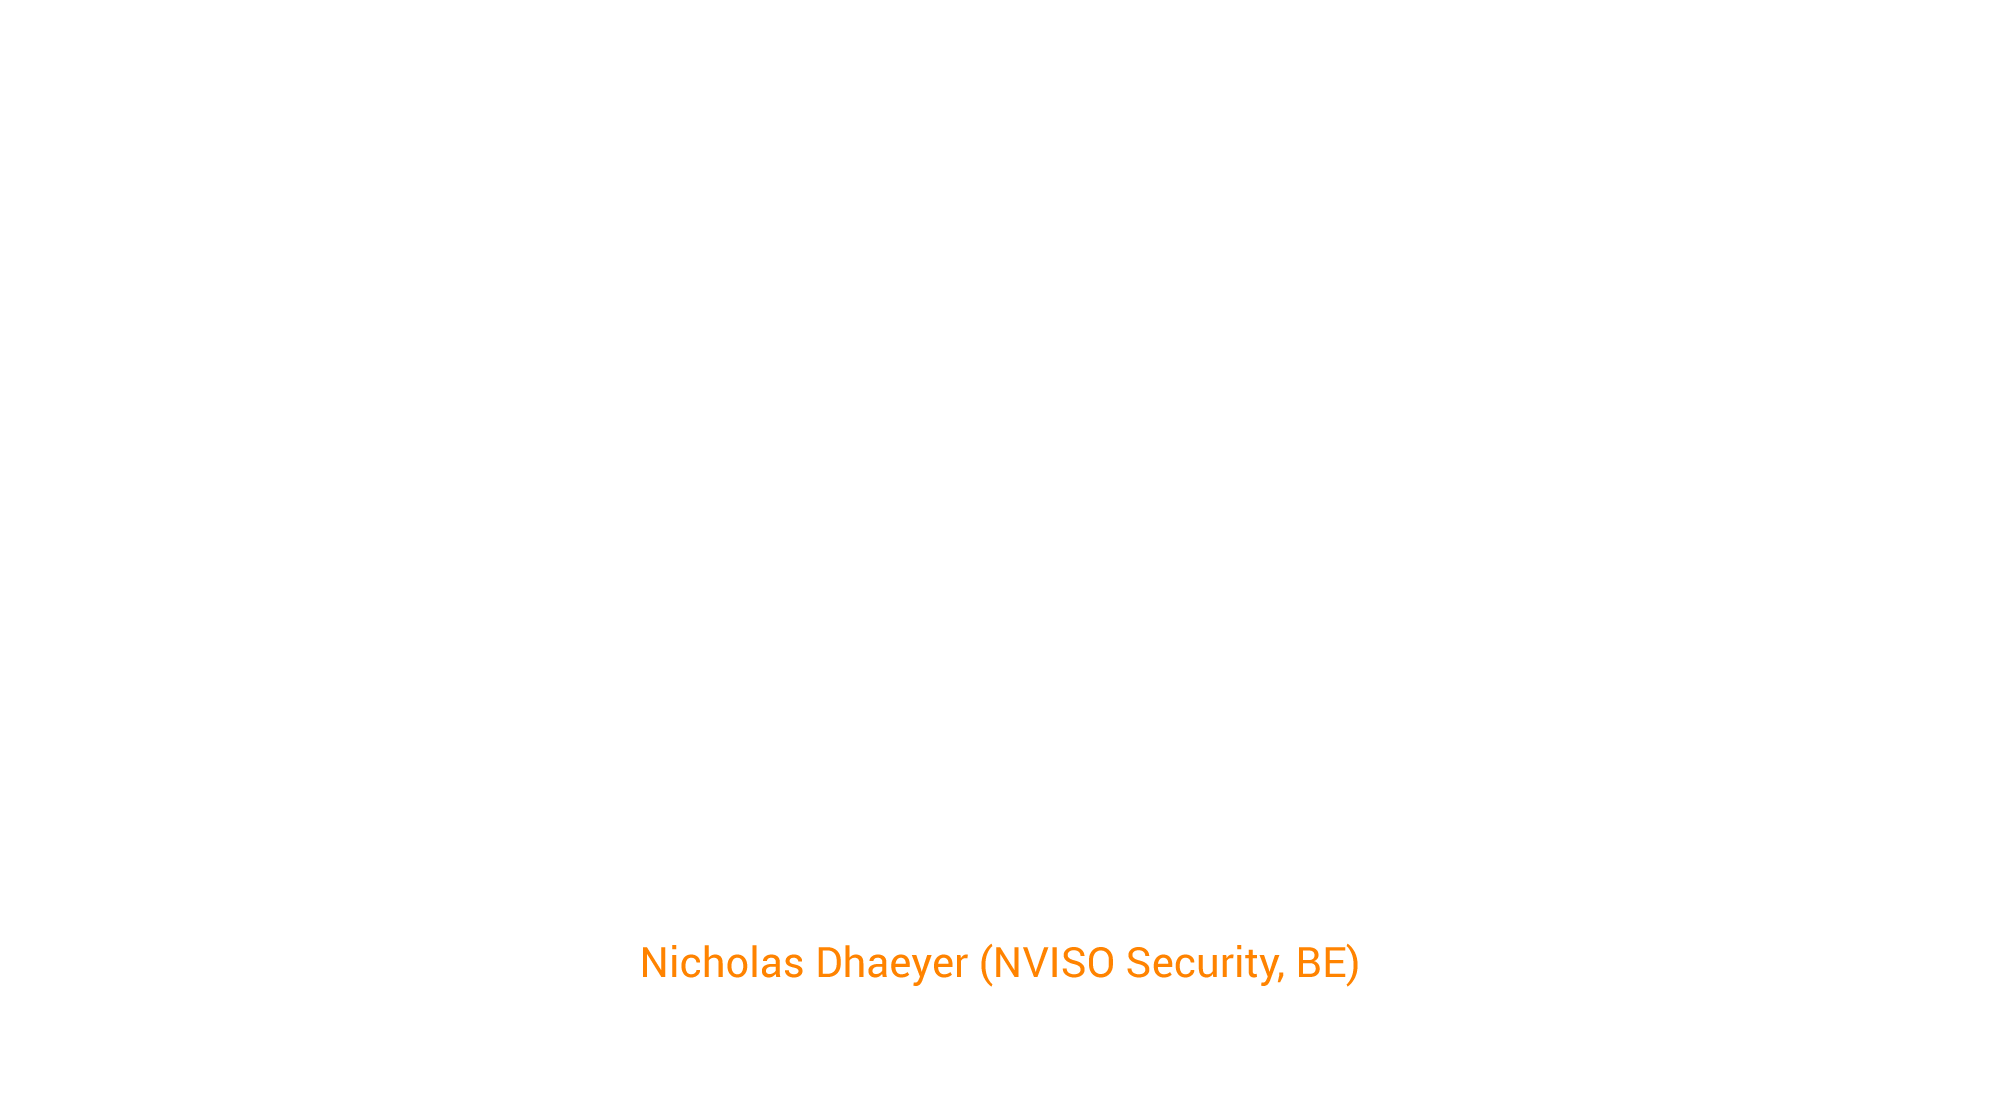 The Blue Side of Documentation